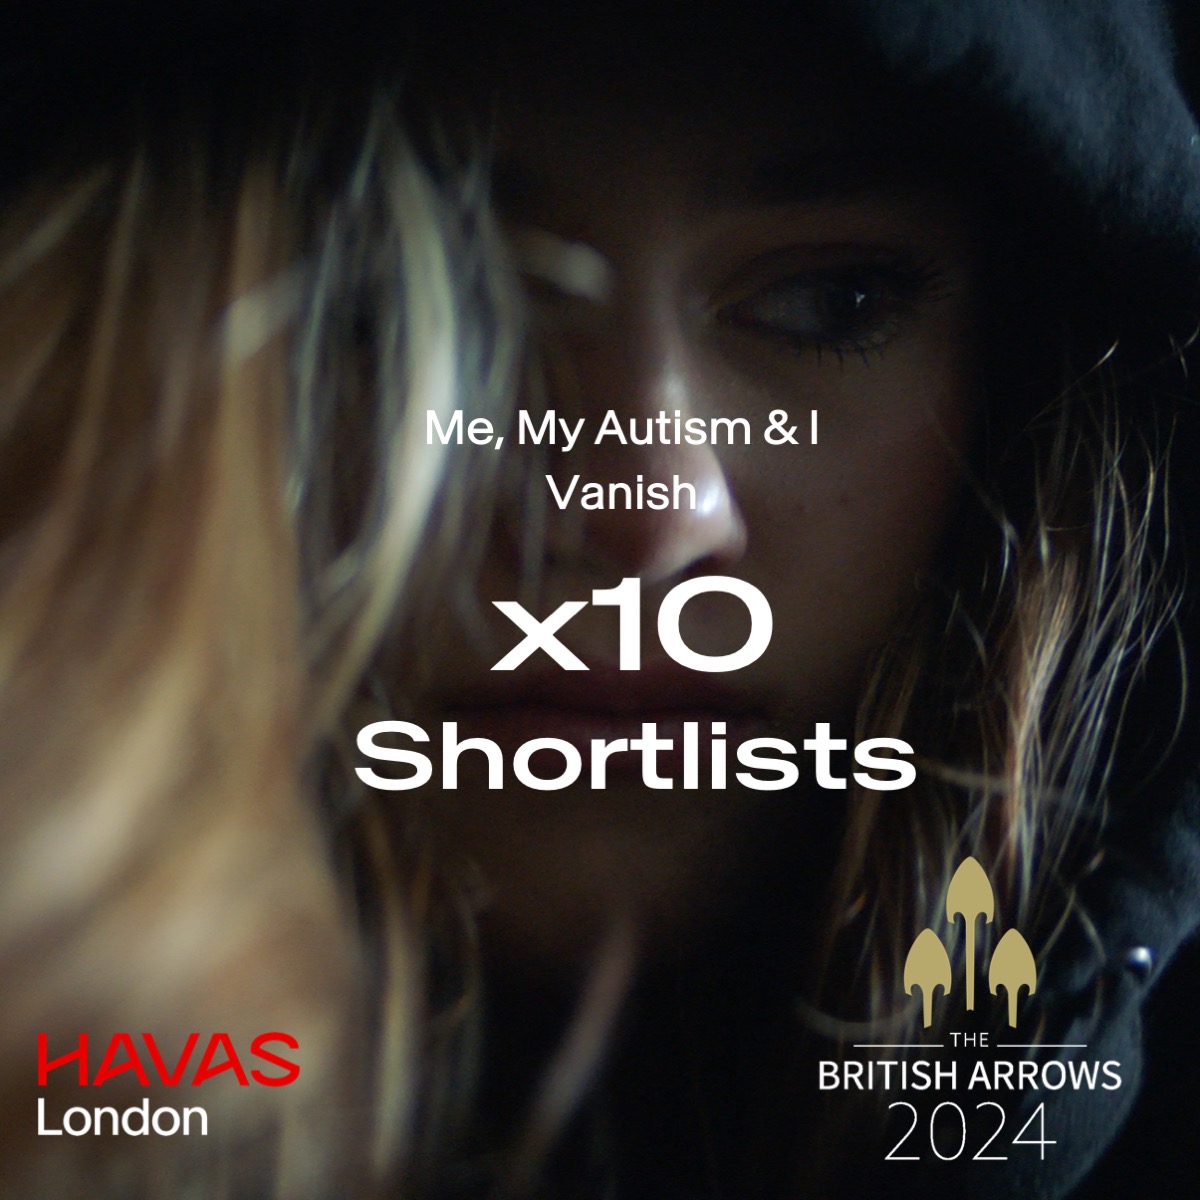 Over the moon to see 10 @britisharrows shortlists for Me, My Autism & I 🙌 🏹Household Goods 🏹Integrated Campaign 🏹Best over 90-second commercial 🏹Writing 🏹Achievement in Production 🏹Casting 🏹Editing 🏹Sound Design 🏹Original Composition 🏹Best Director